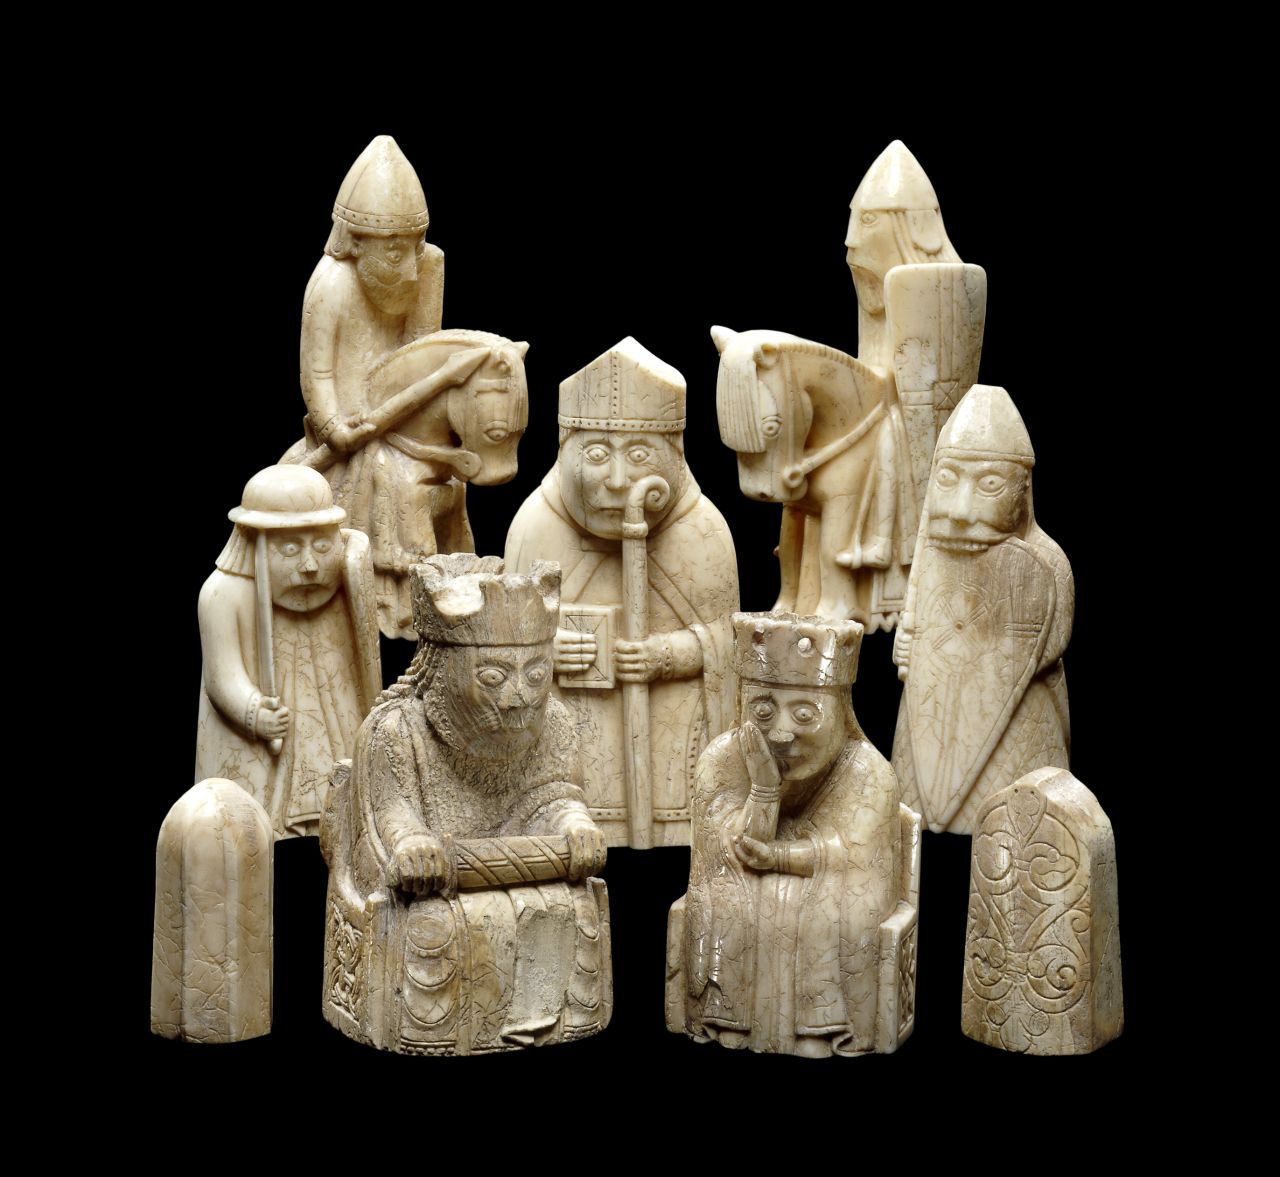 These delicate chess pieces give an insight into a more thoughtful Viking, rather than the stereotypical image of barbaric warrior. 